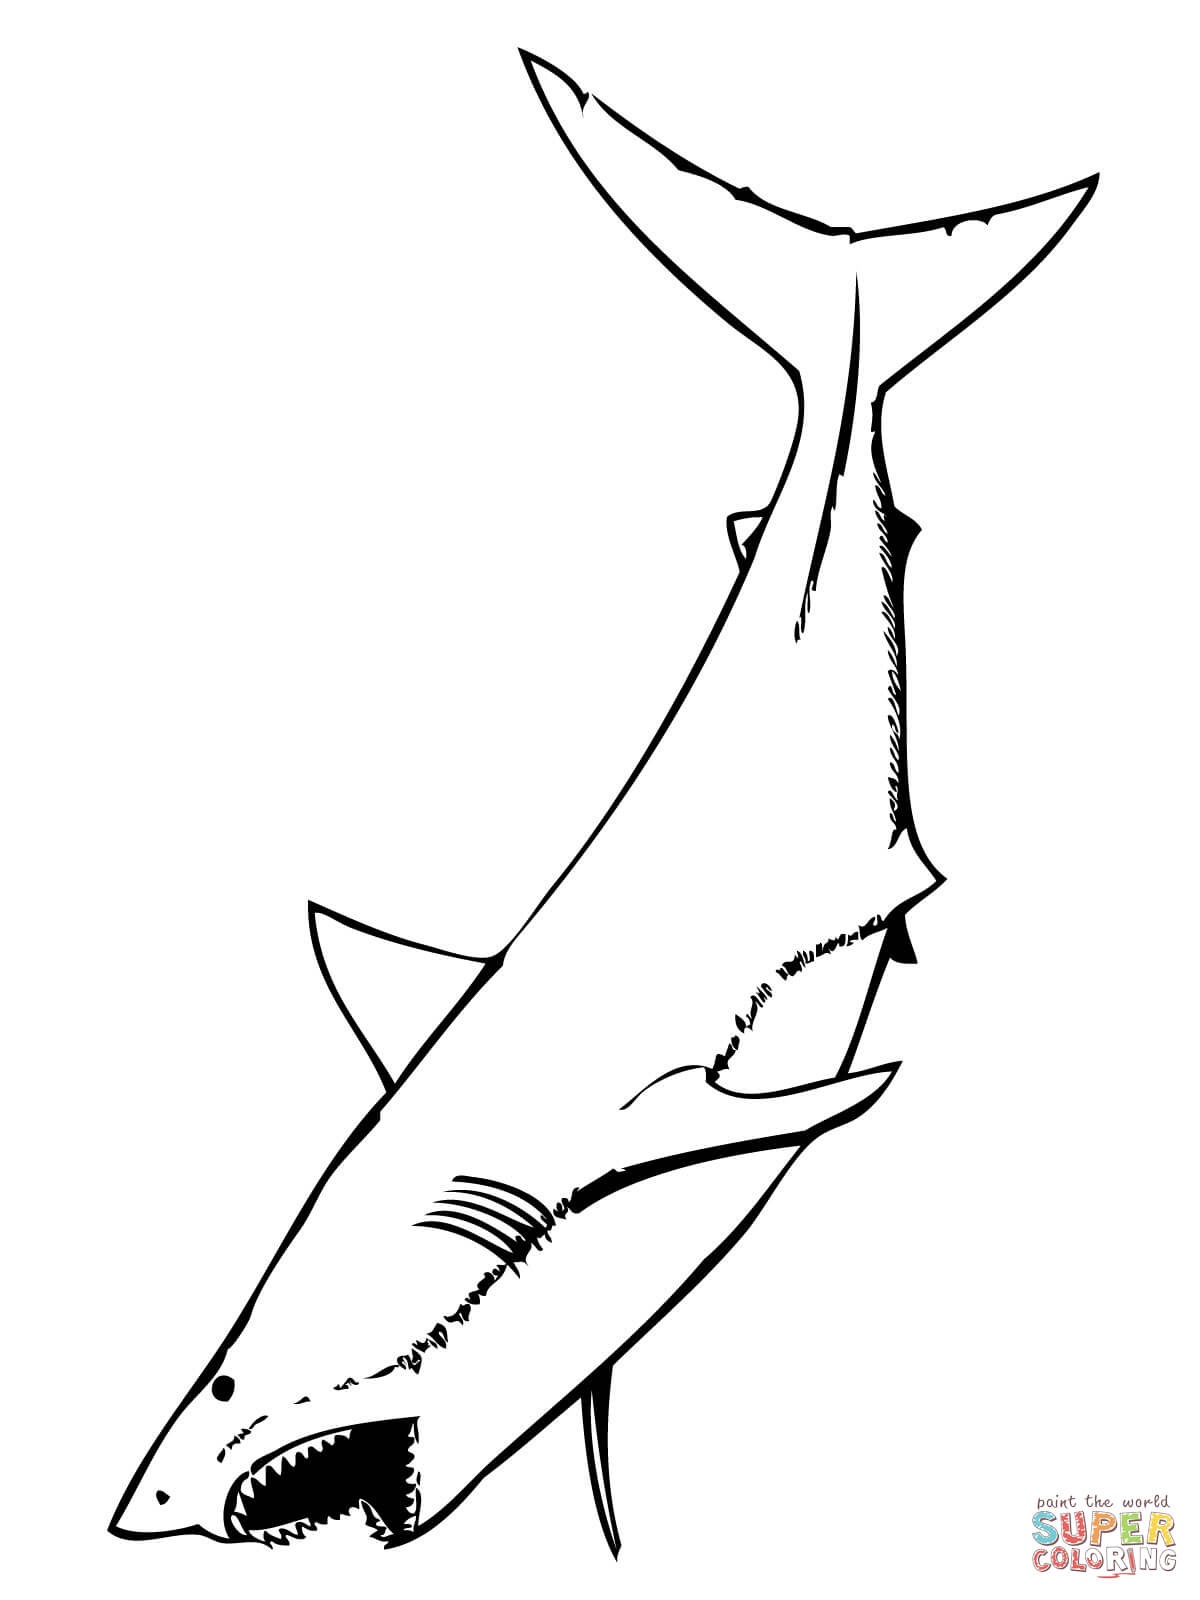 Great White Shark With Mouth Open Coloring Page | Free Printable - Free Printable Great White Shark Coloring Pages